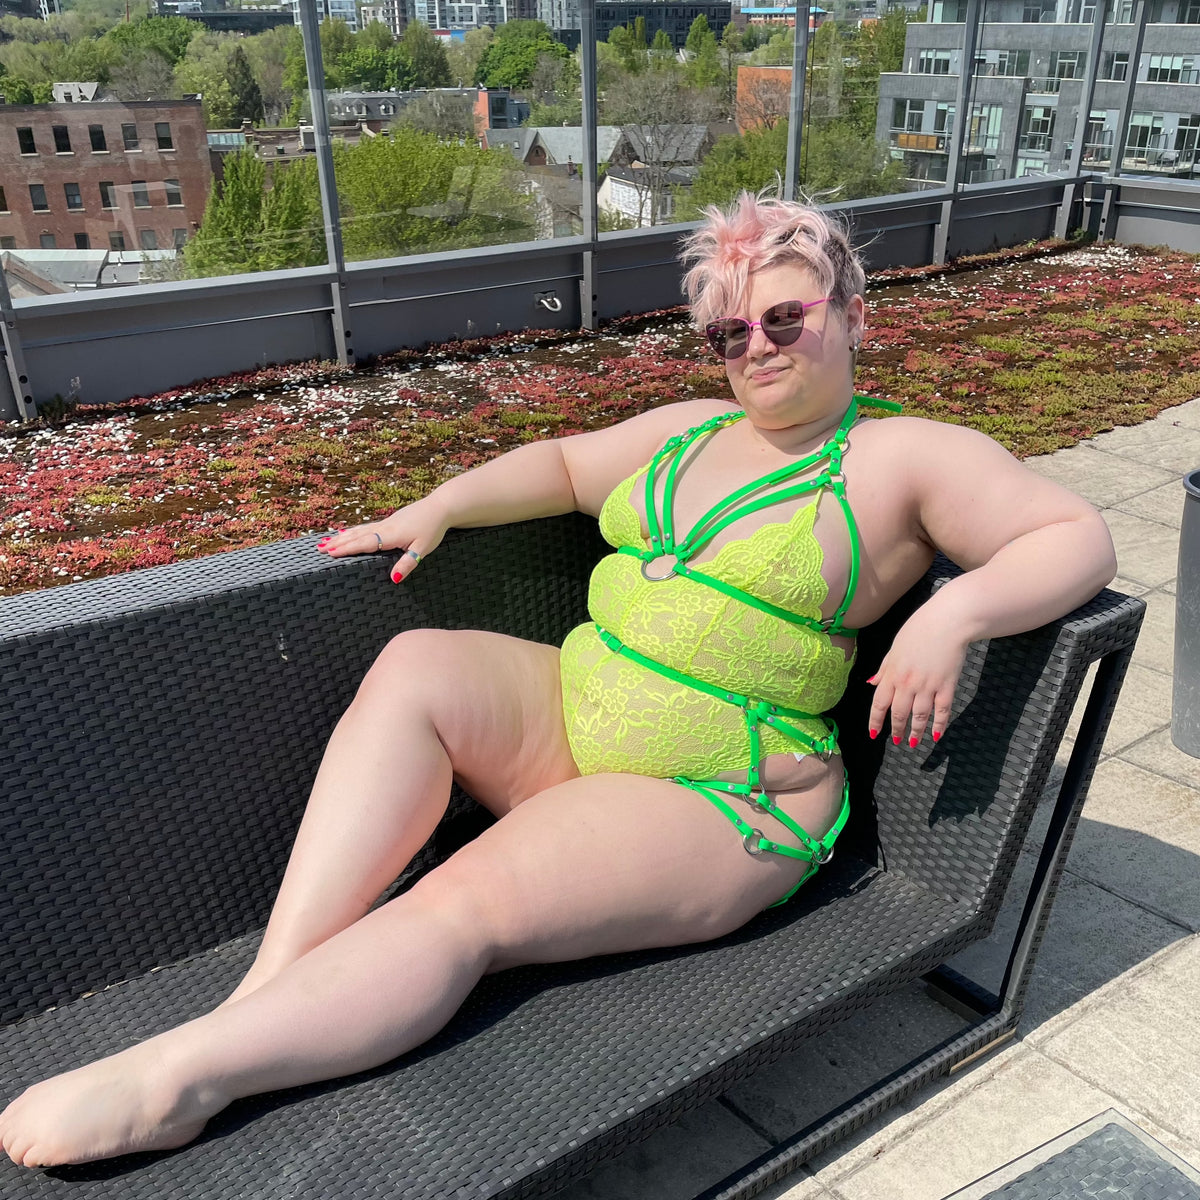 Plus sized woman outside sitting on a couch in a neon bodysuit, a harness top outfit and a sexy butt harness.